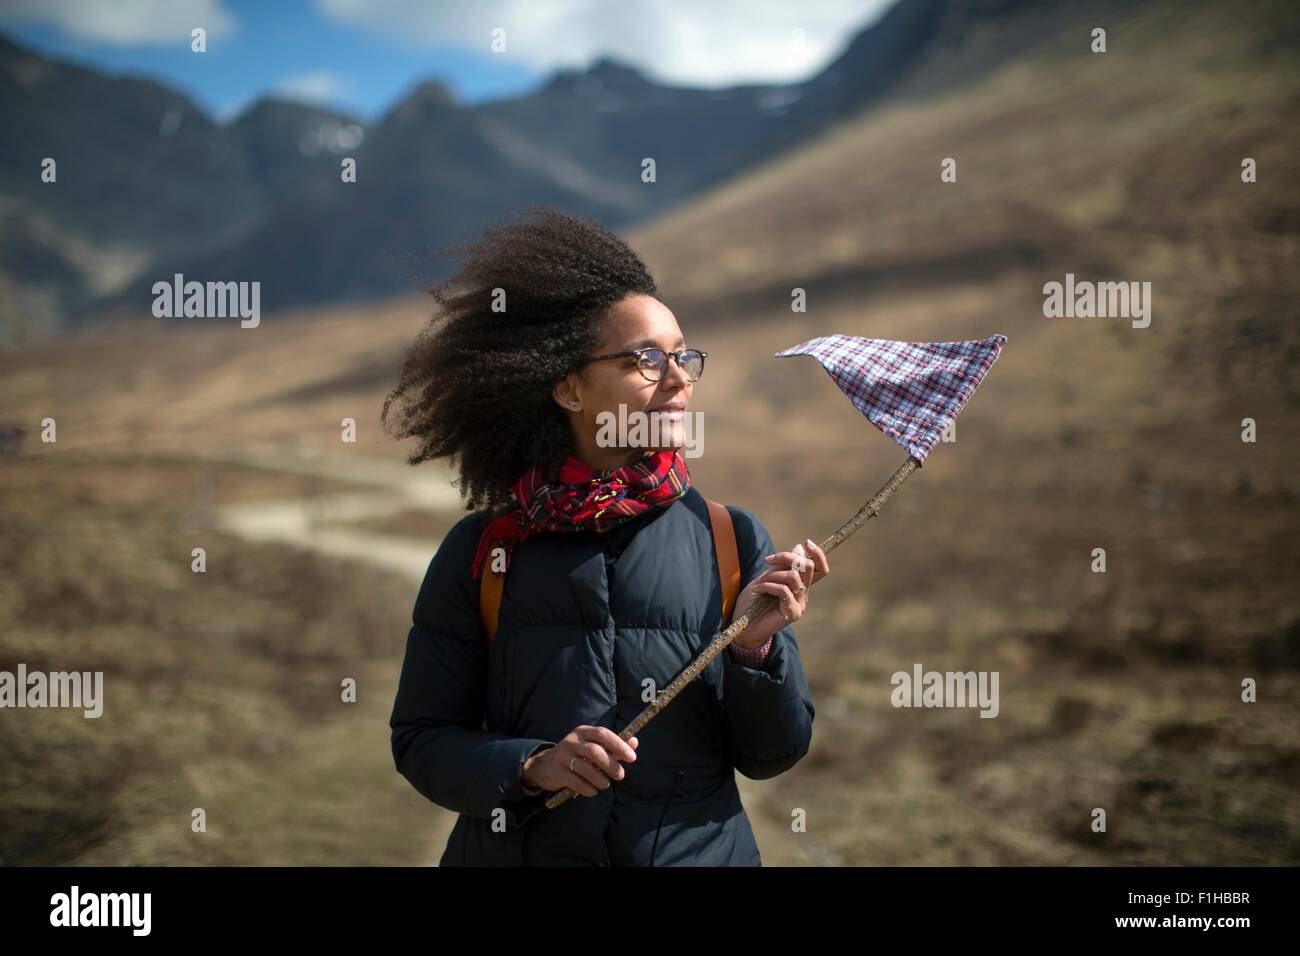 Mid adult woman holding flag, looking away Stock Photo